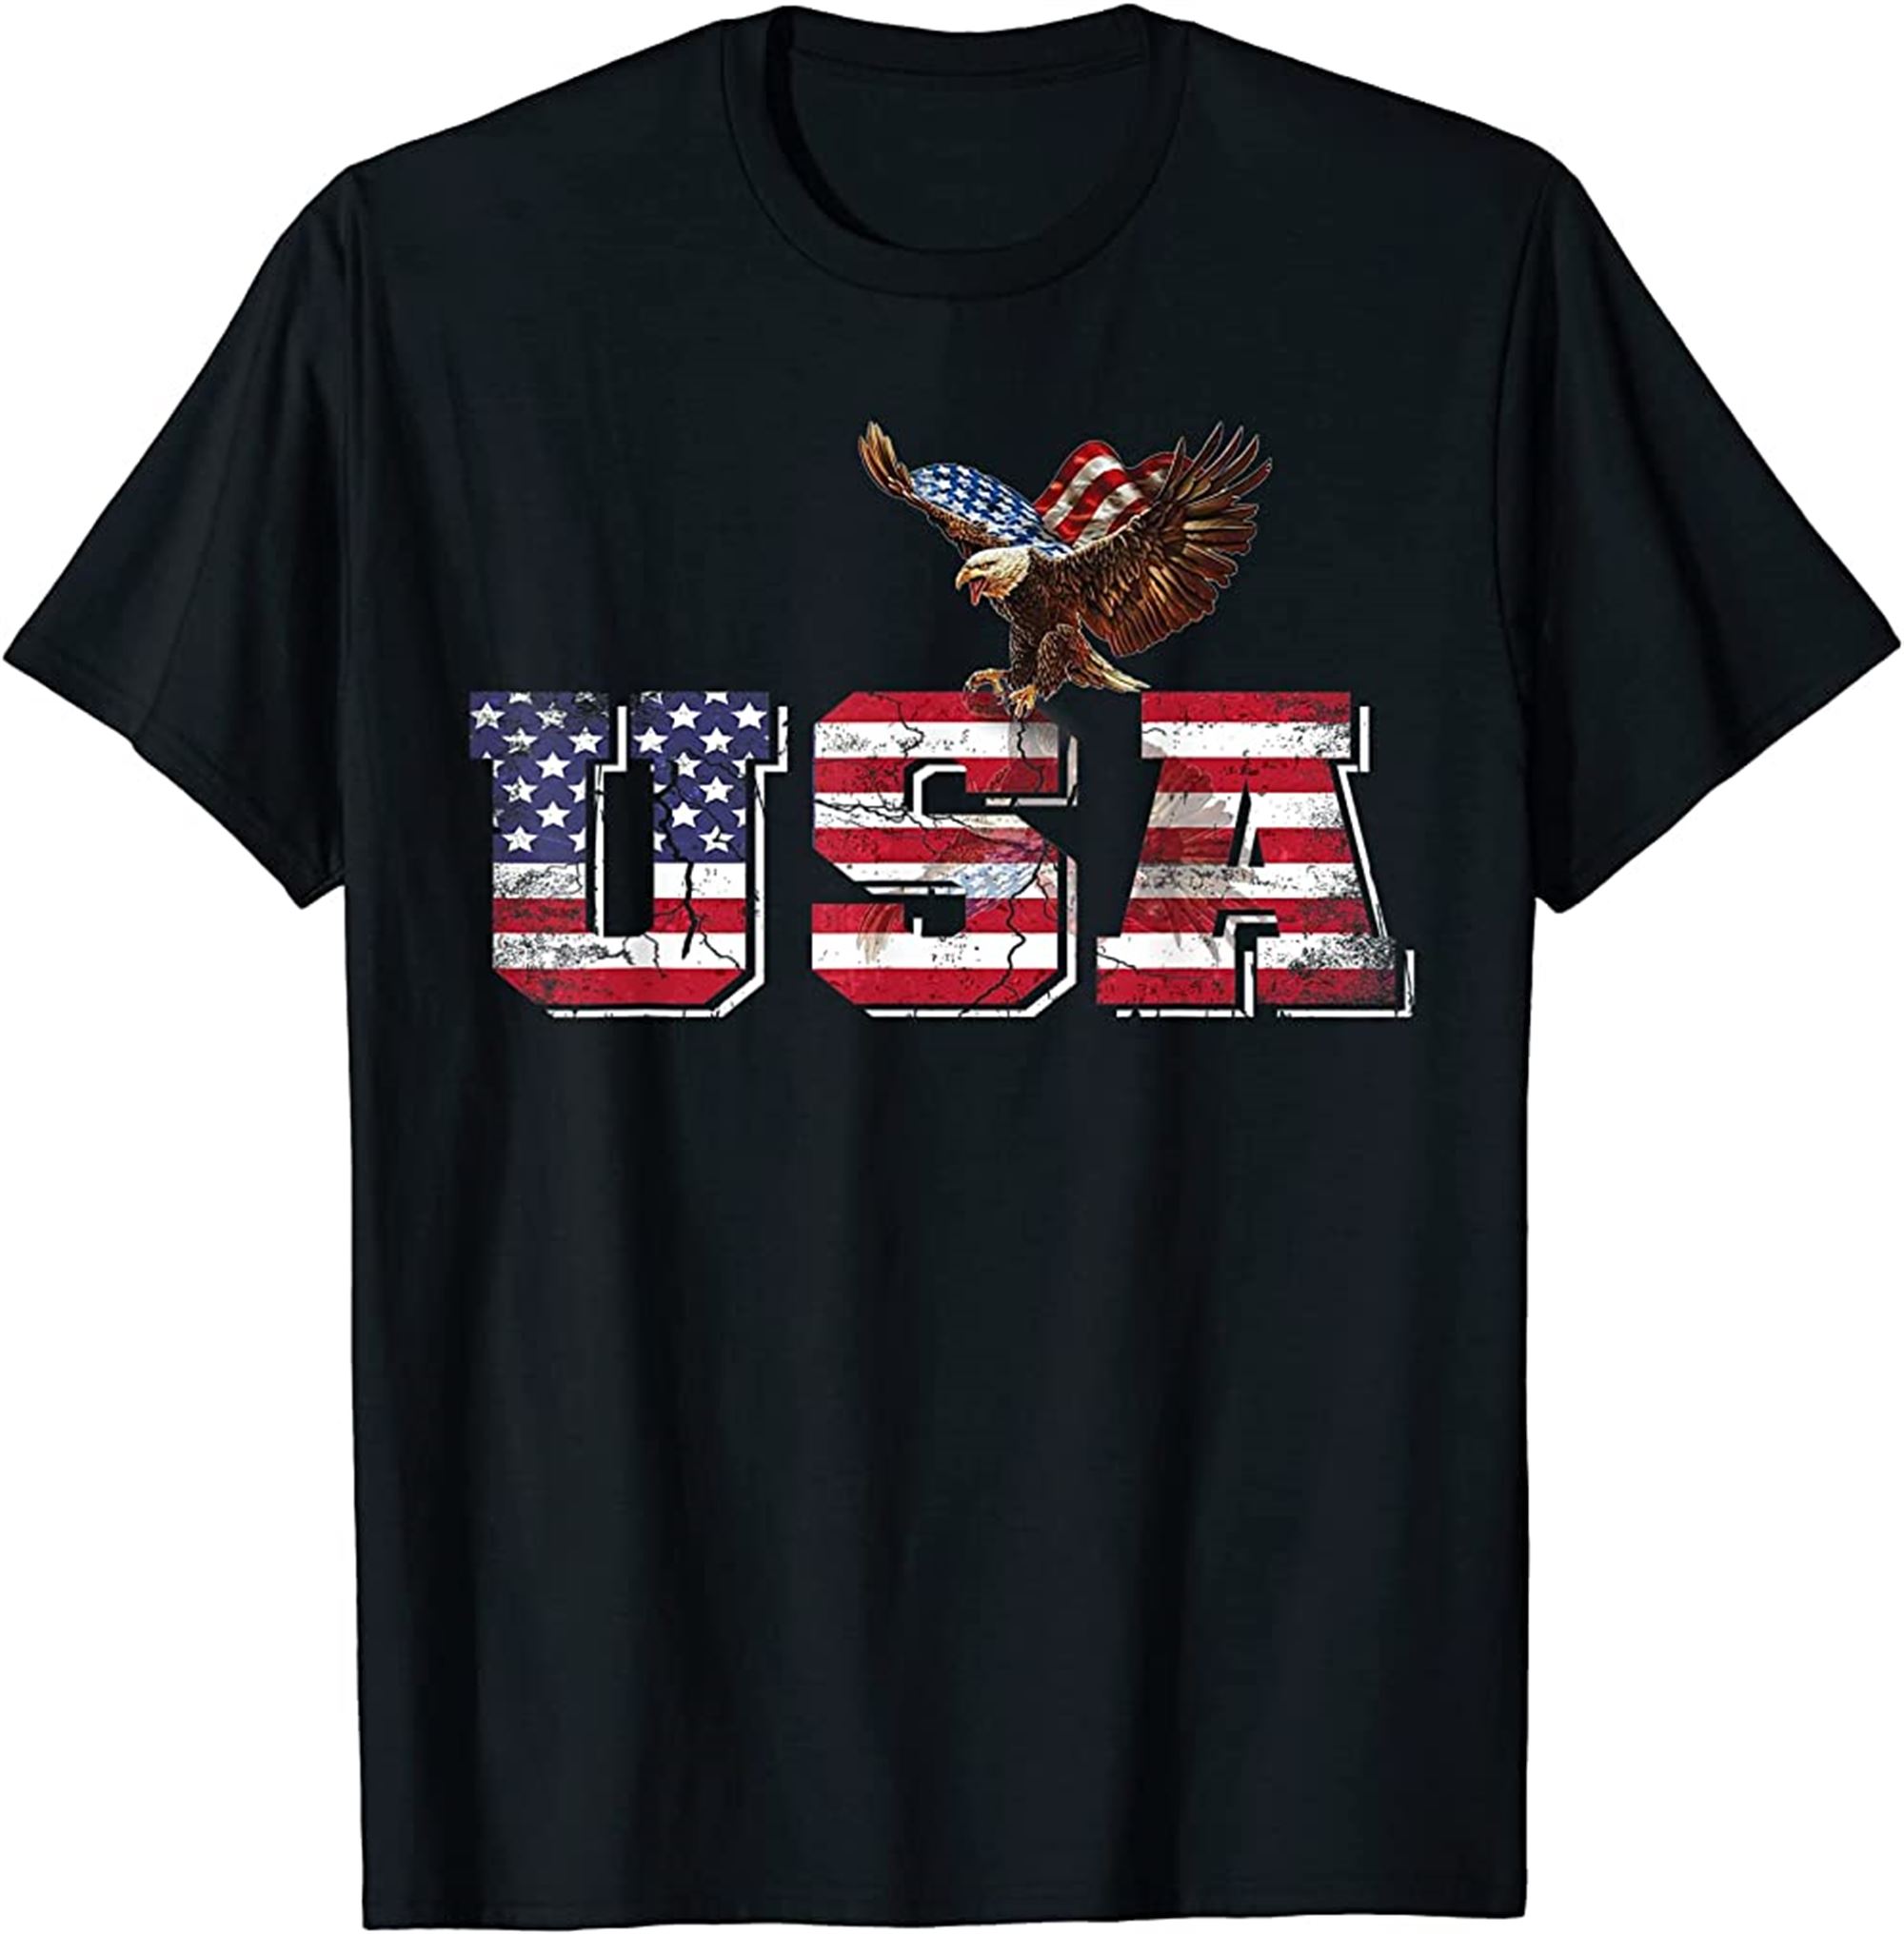 Usa Us American Flag Patriotic 4th Of July Bald Eagle Merica T-shirt Plus Size Up To 5xl